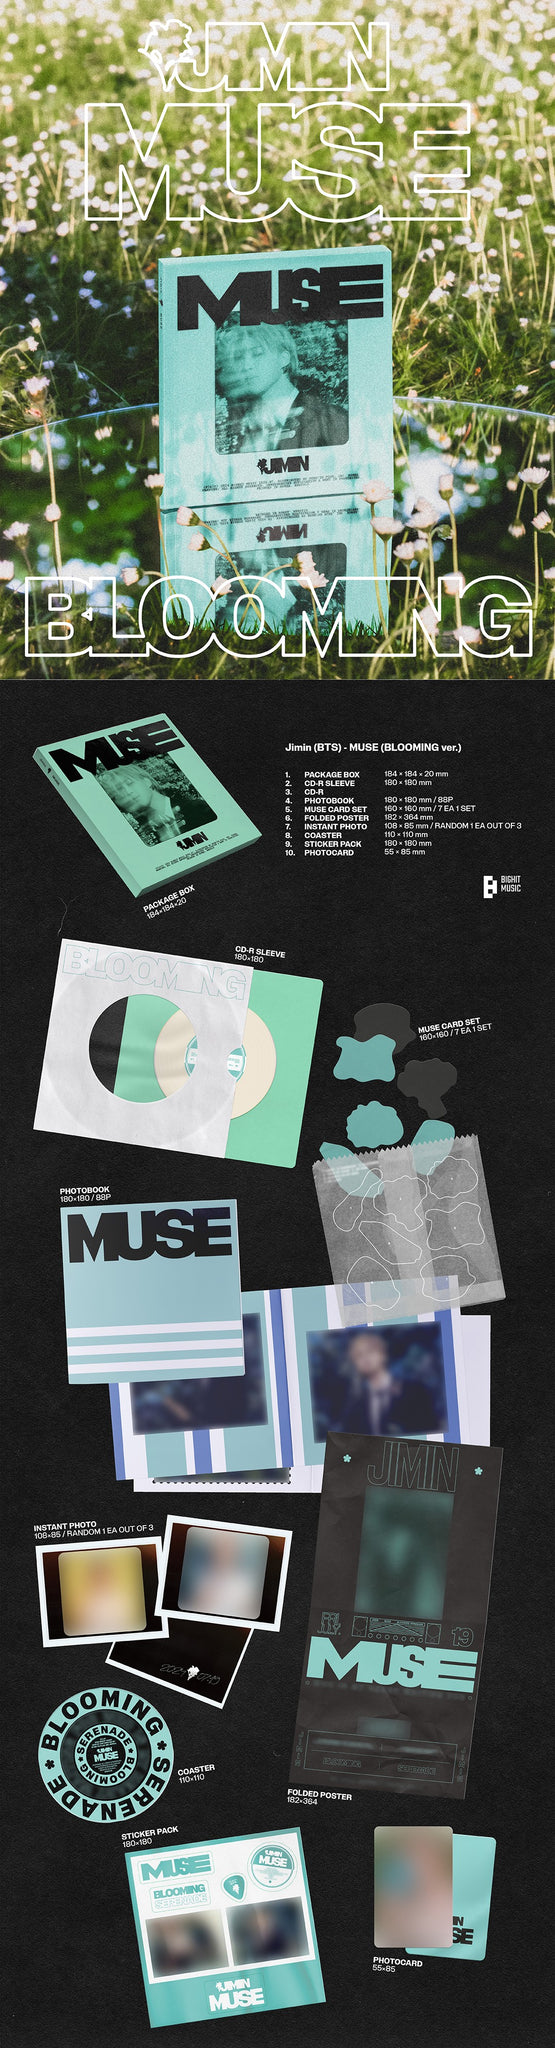 Jimin (BTS) 2nd Solo Album MUSE - BLOOMING Version Inclusions: Package Box, Photobook, CD & Sleeve, MUSE Card Set, Folded Poster, Instant Photo, Coaster, Sticker Pack, Photocard